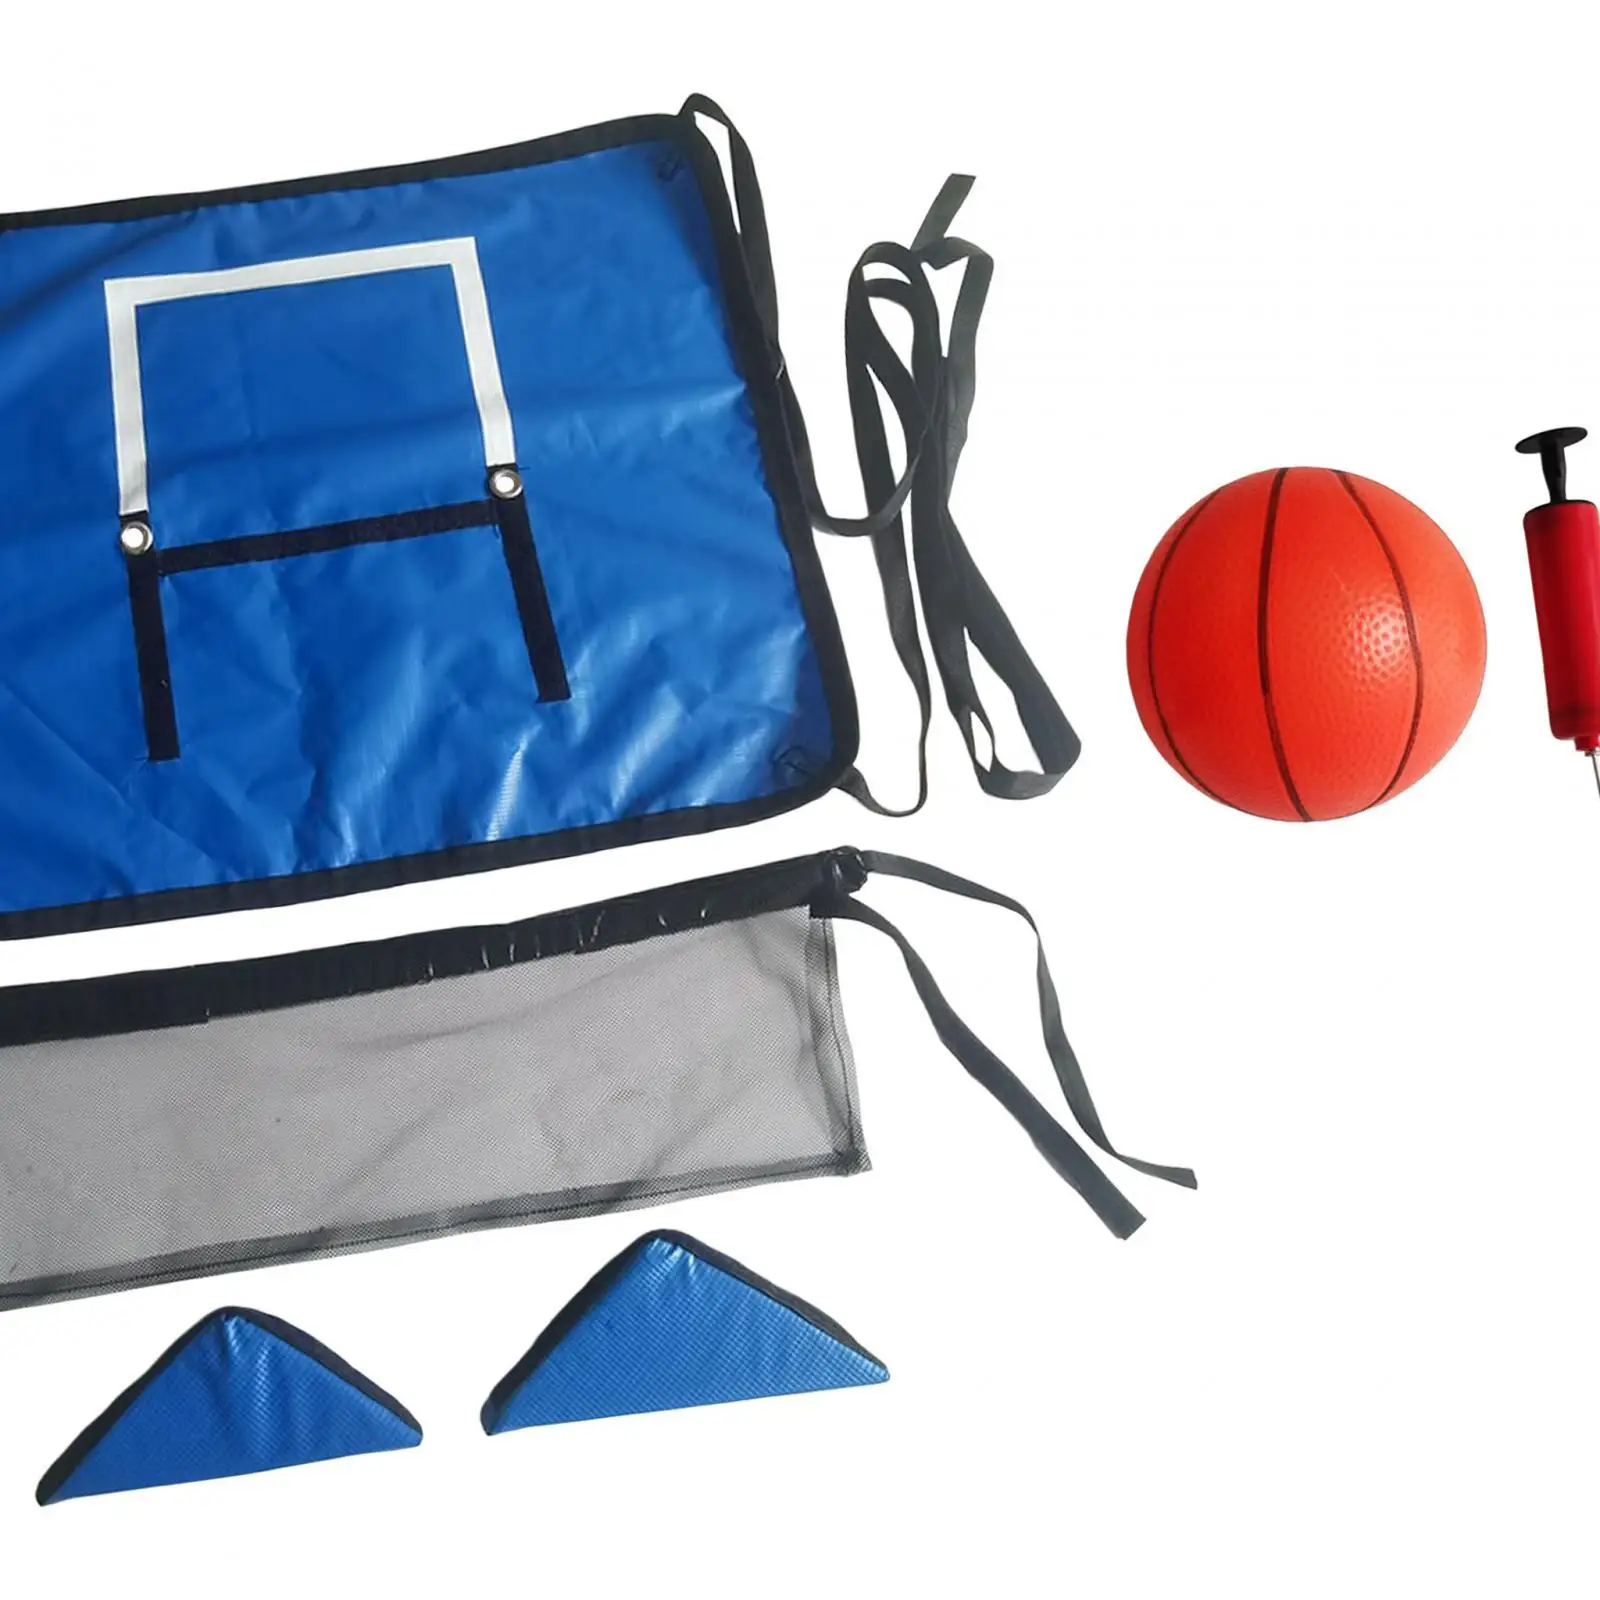 

Basketball Hoop for Trampoline with Mini Basketball and Pump Waterproof Sports Toys Universal Trampoline Accessory for All Ages